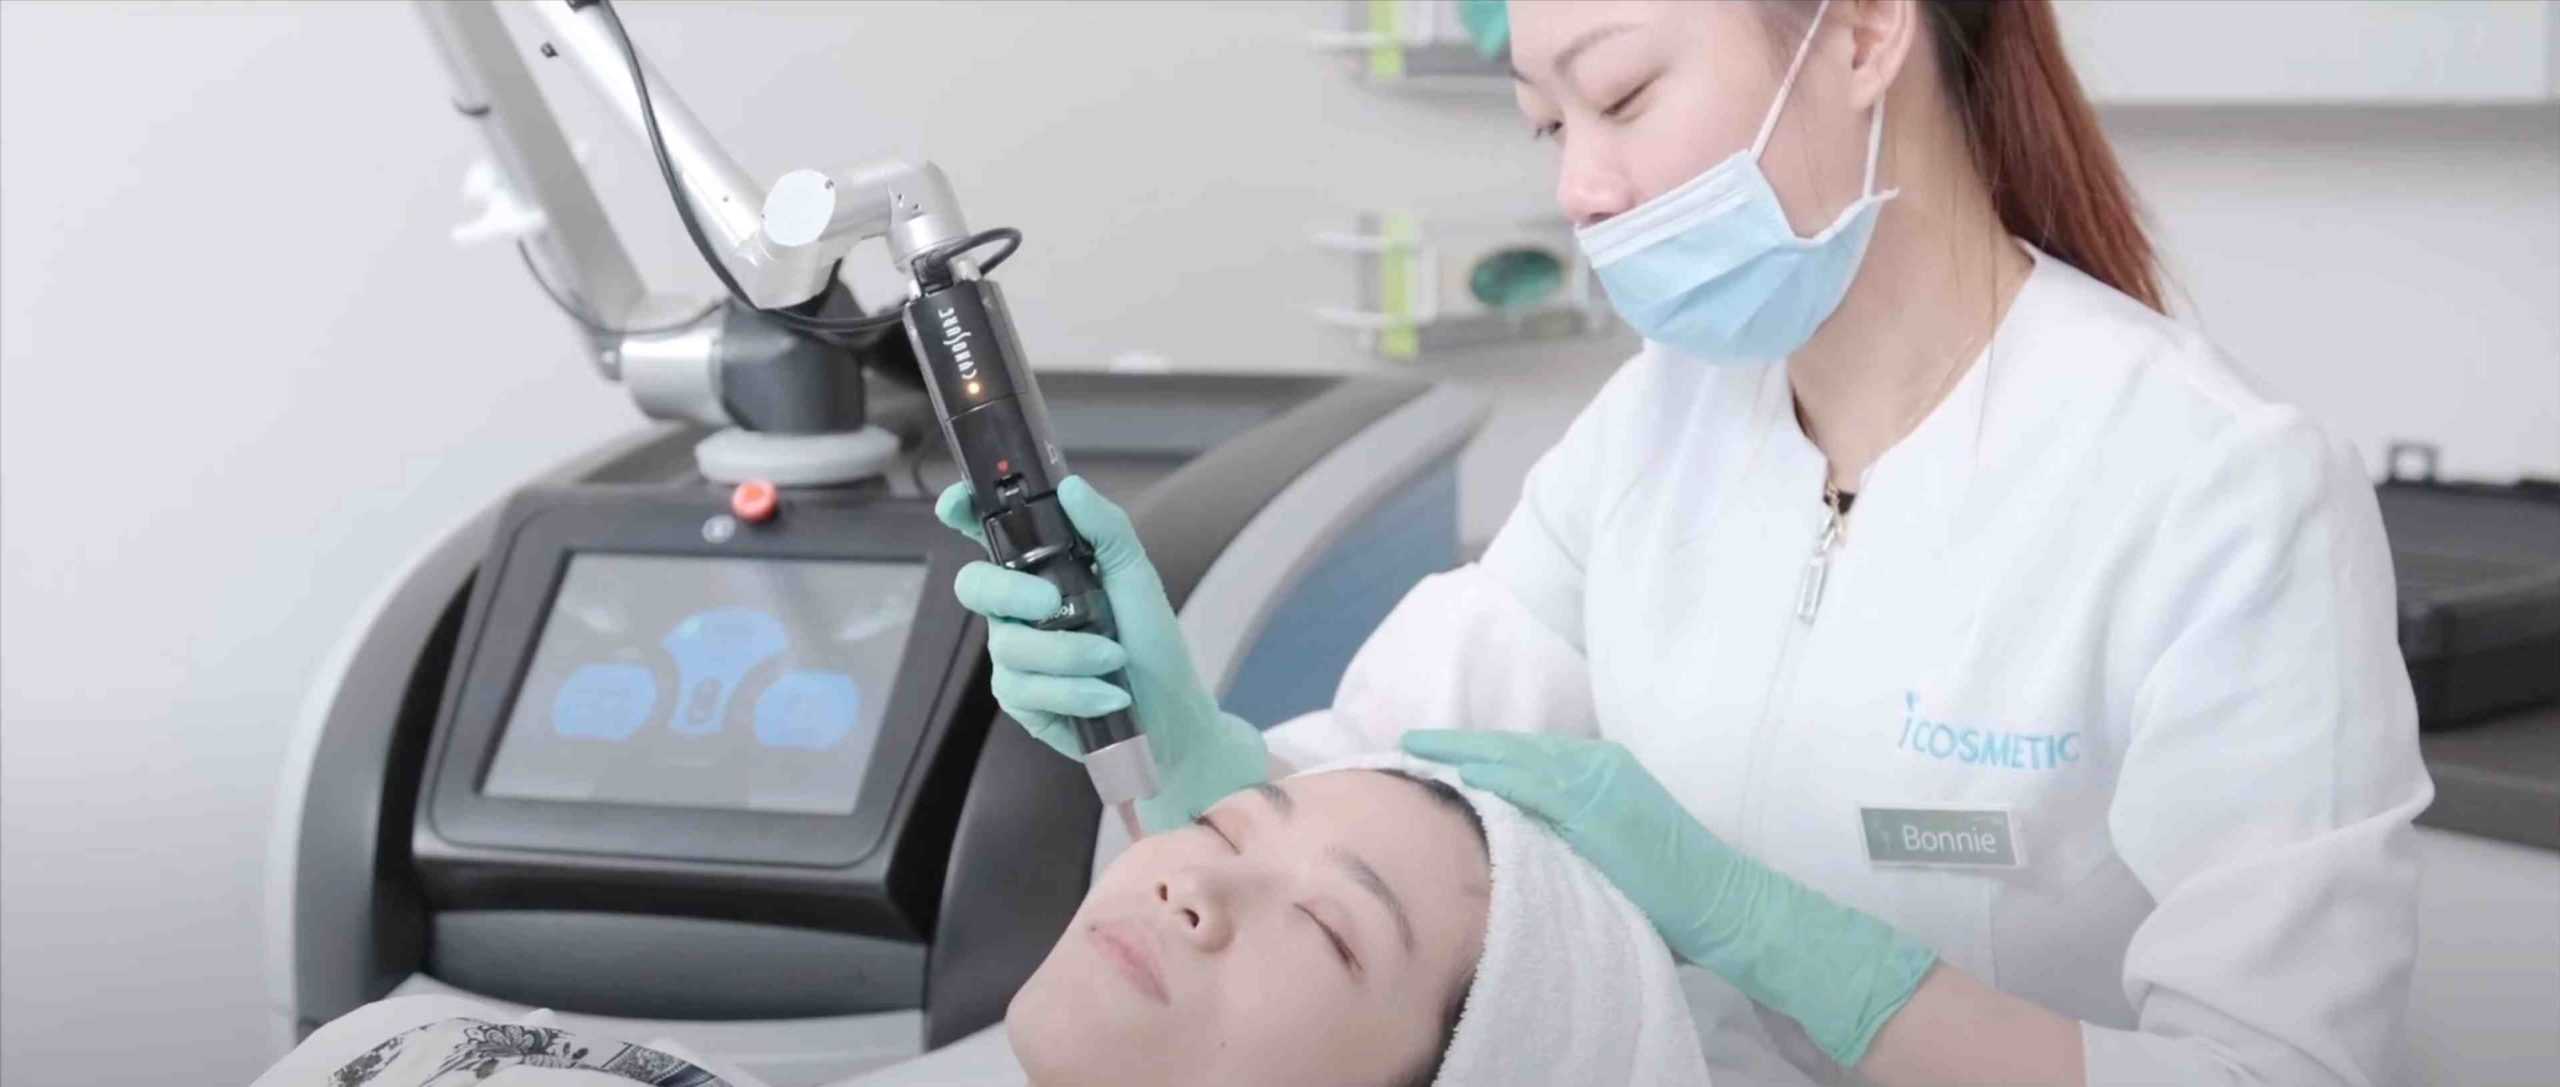 Harmony Unveiled: Redefining Beauty Evolution with Ultherapy and 超聲刀